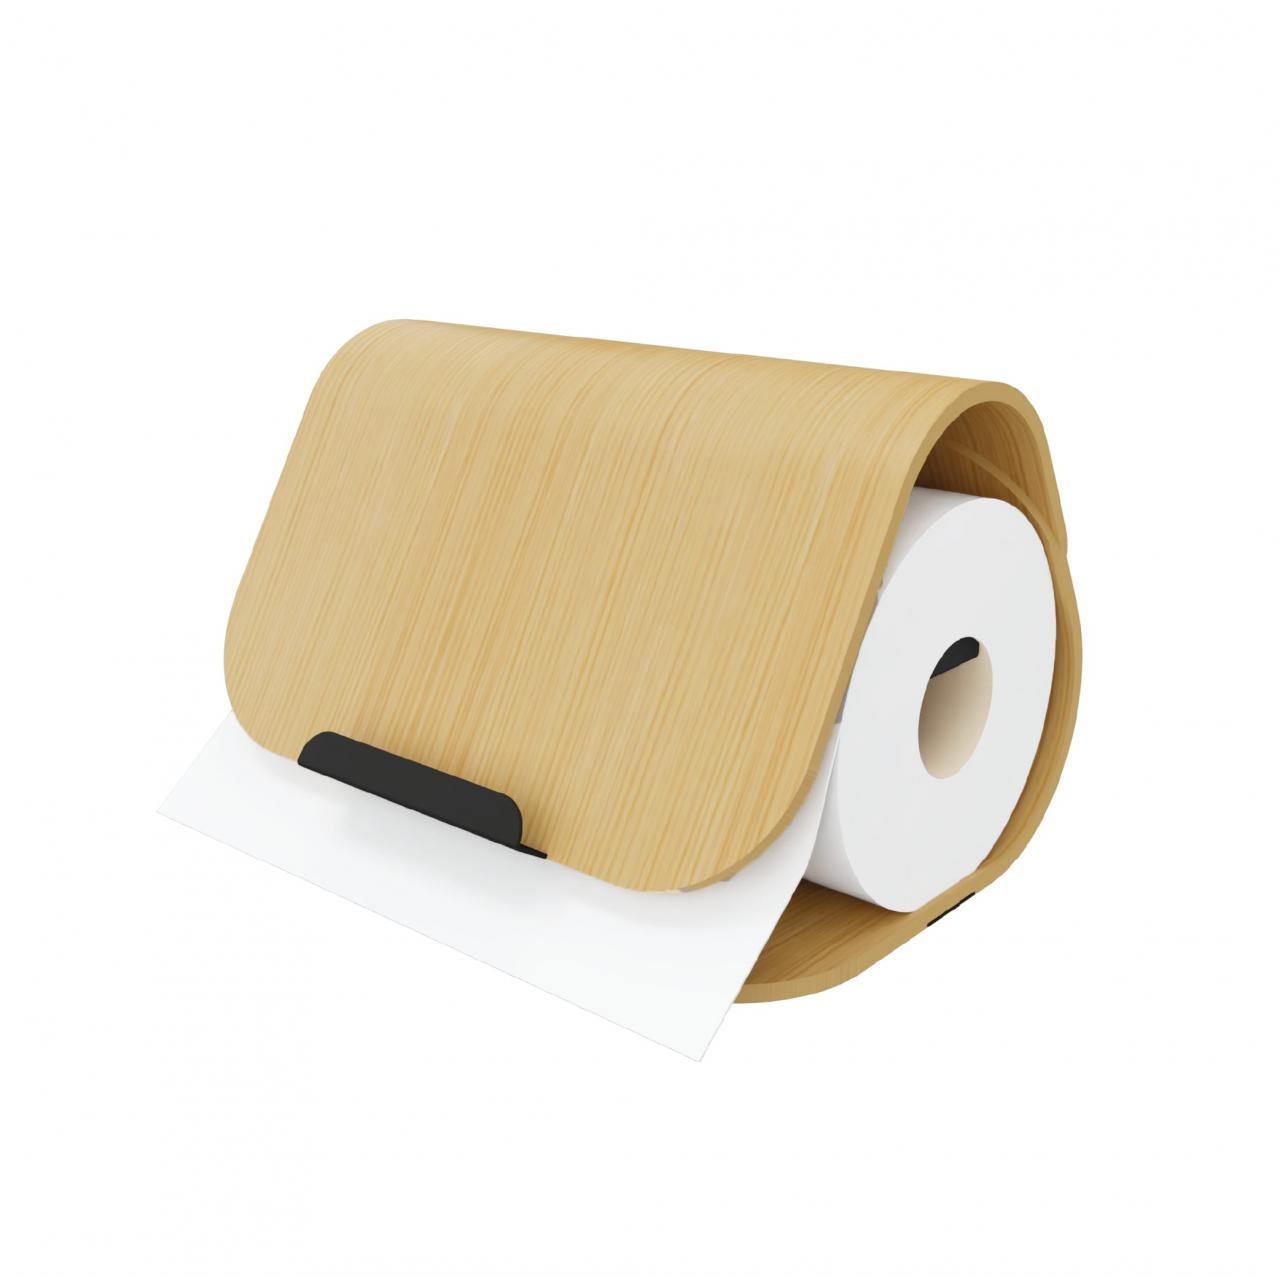 PILOT oak paper towel dispenser with tablet holder - Practical accessory for the kitchen.